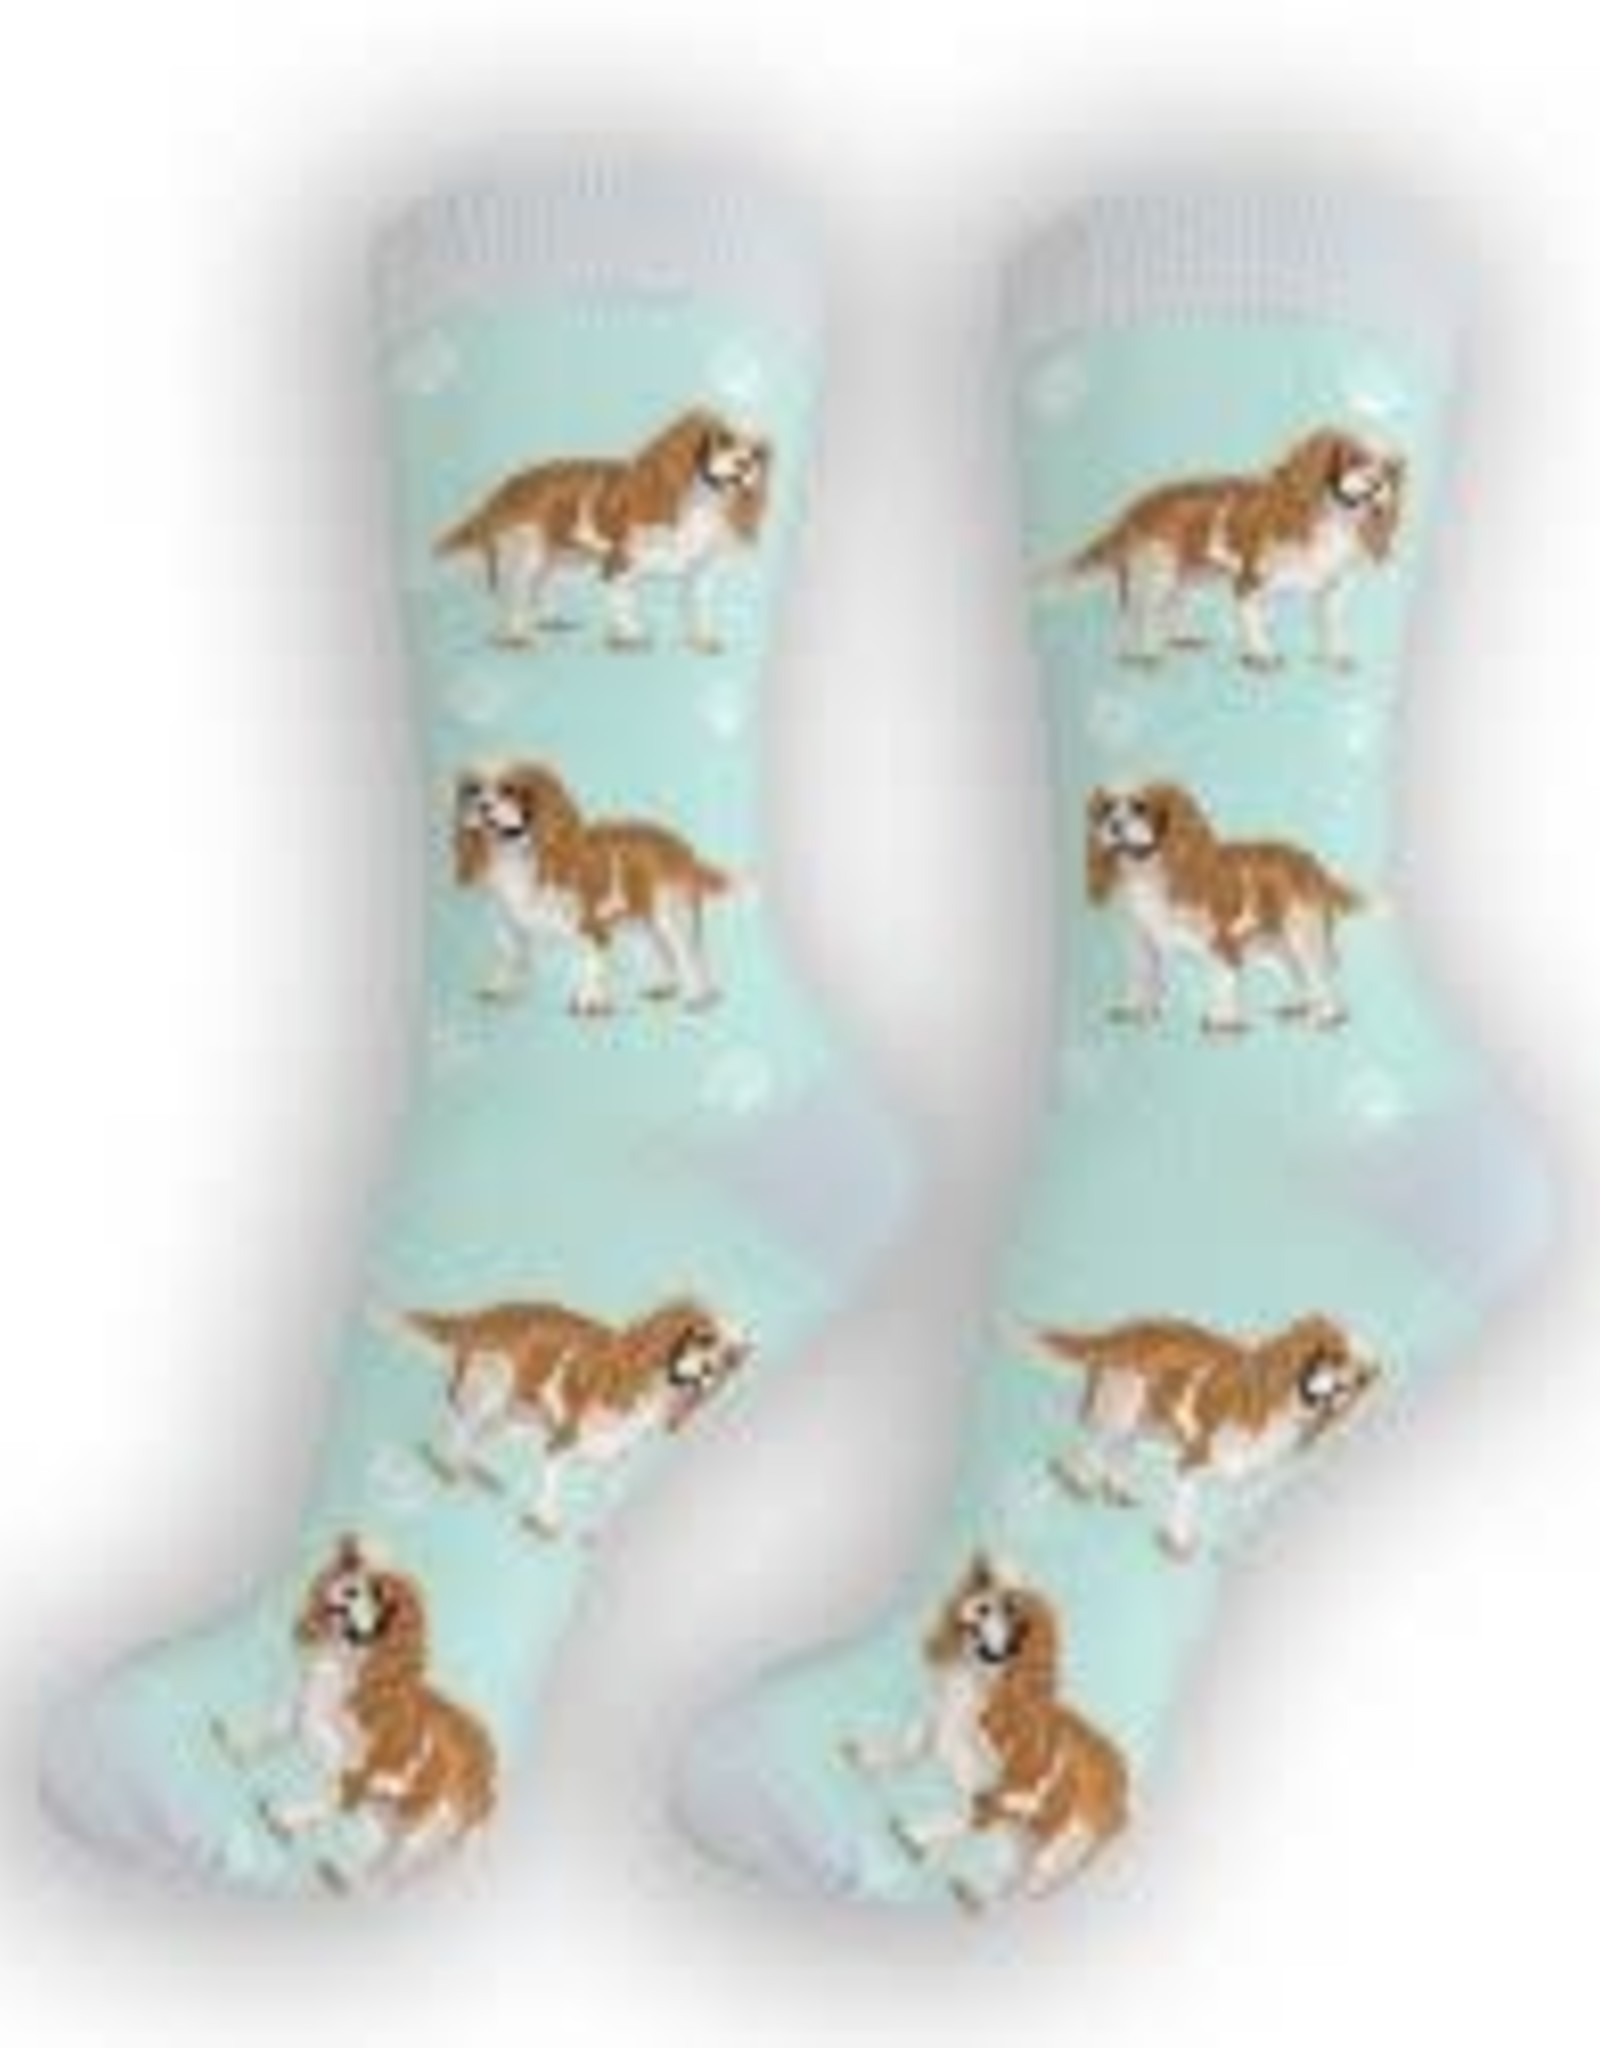 E and S CAVALIER KING CHARLES HAPPY TAILS SOCKS